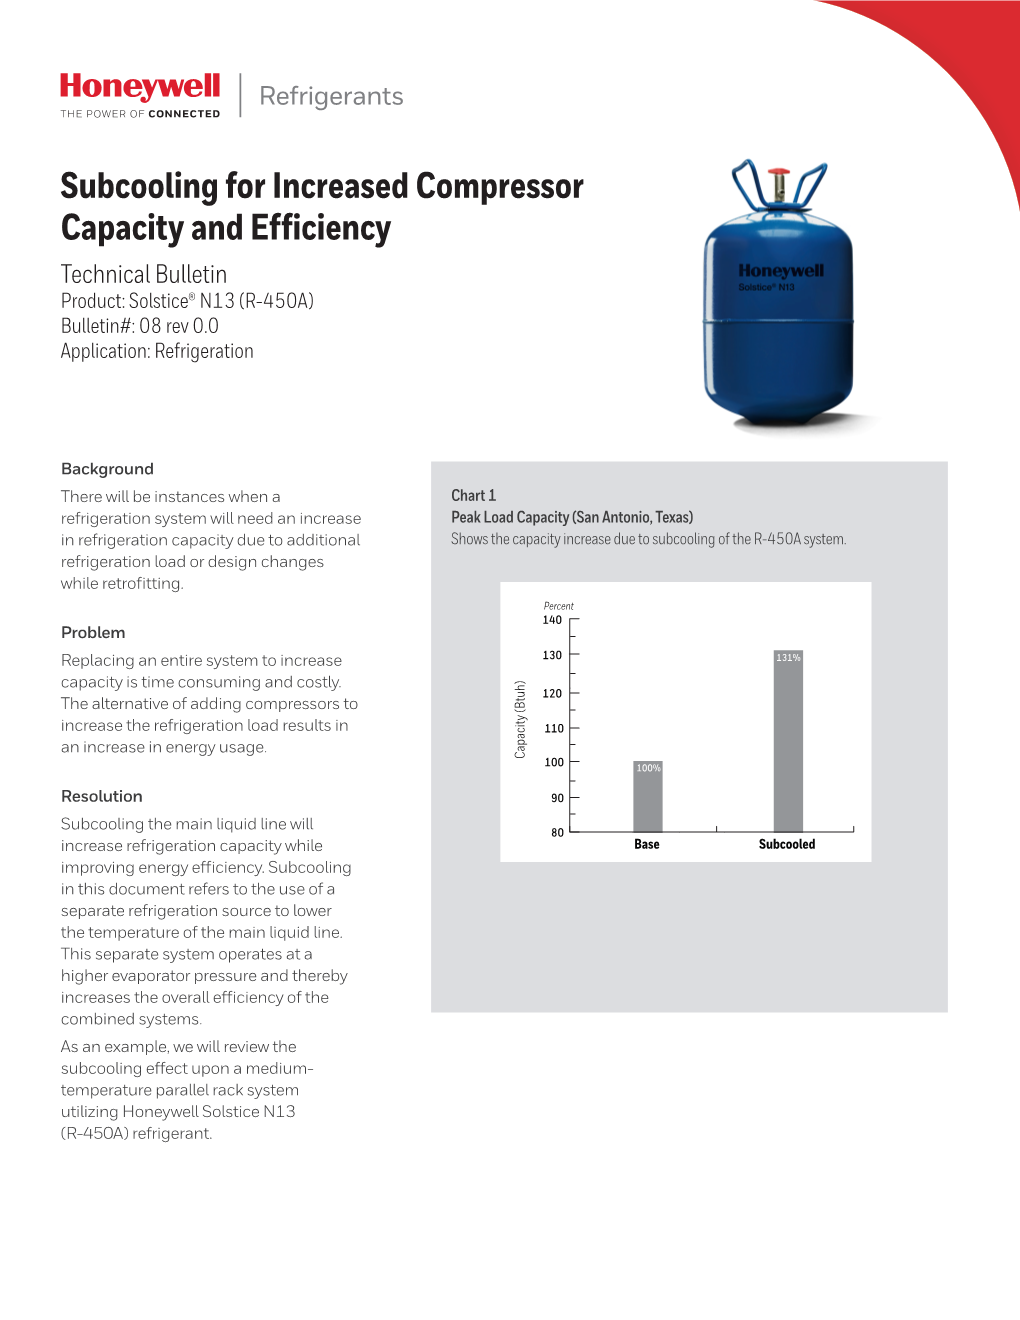 Subcooling for Increased Compressor Capacity, Efficiency with Solstice